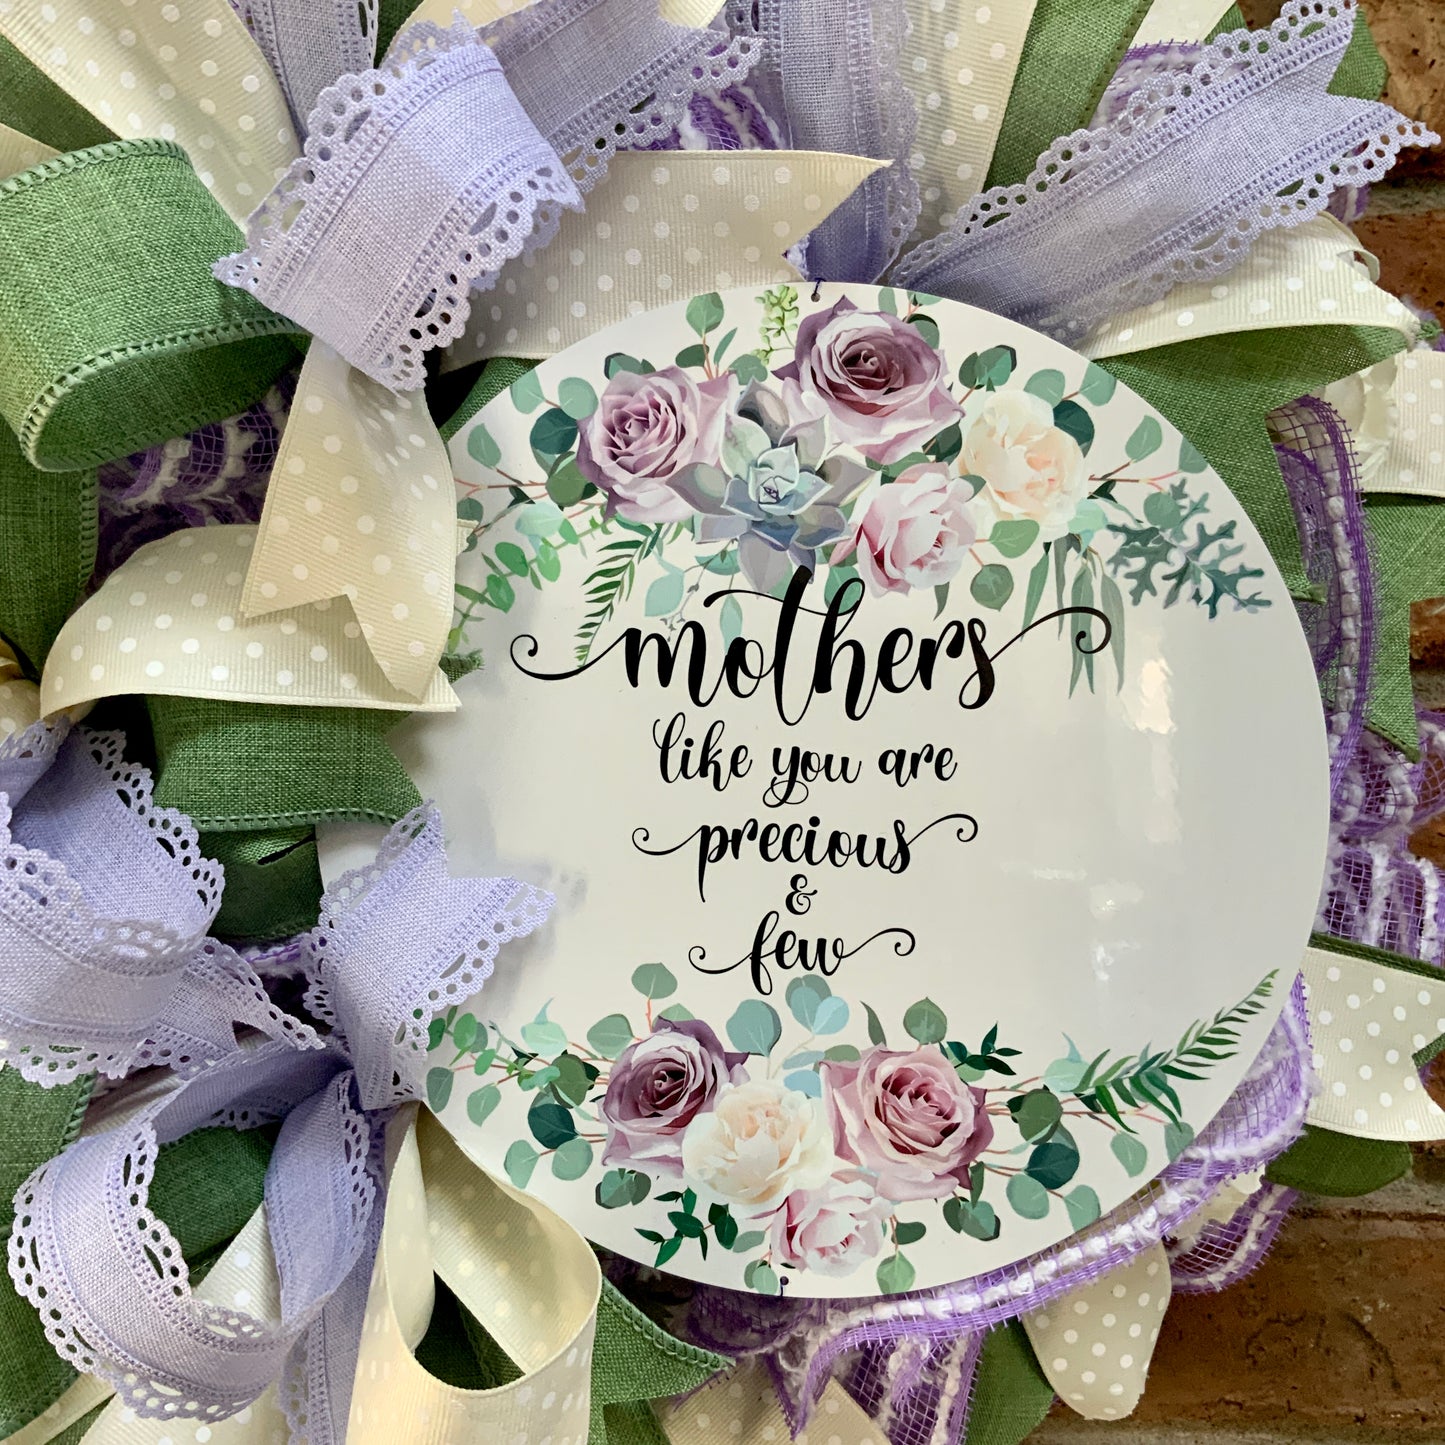 Mothers Day Gift, Mothers Day Wreath, Mom Birthday Gift, Mom Gift, Mom Wreath, Thank You Mom Gift, Thank You Mom Decor, New Mom Wreath